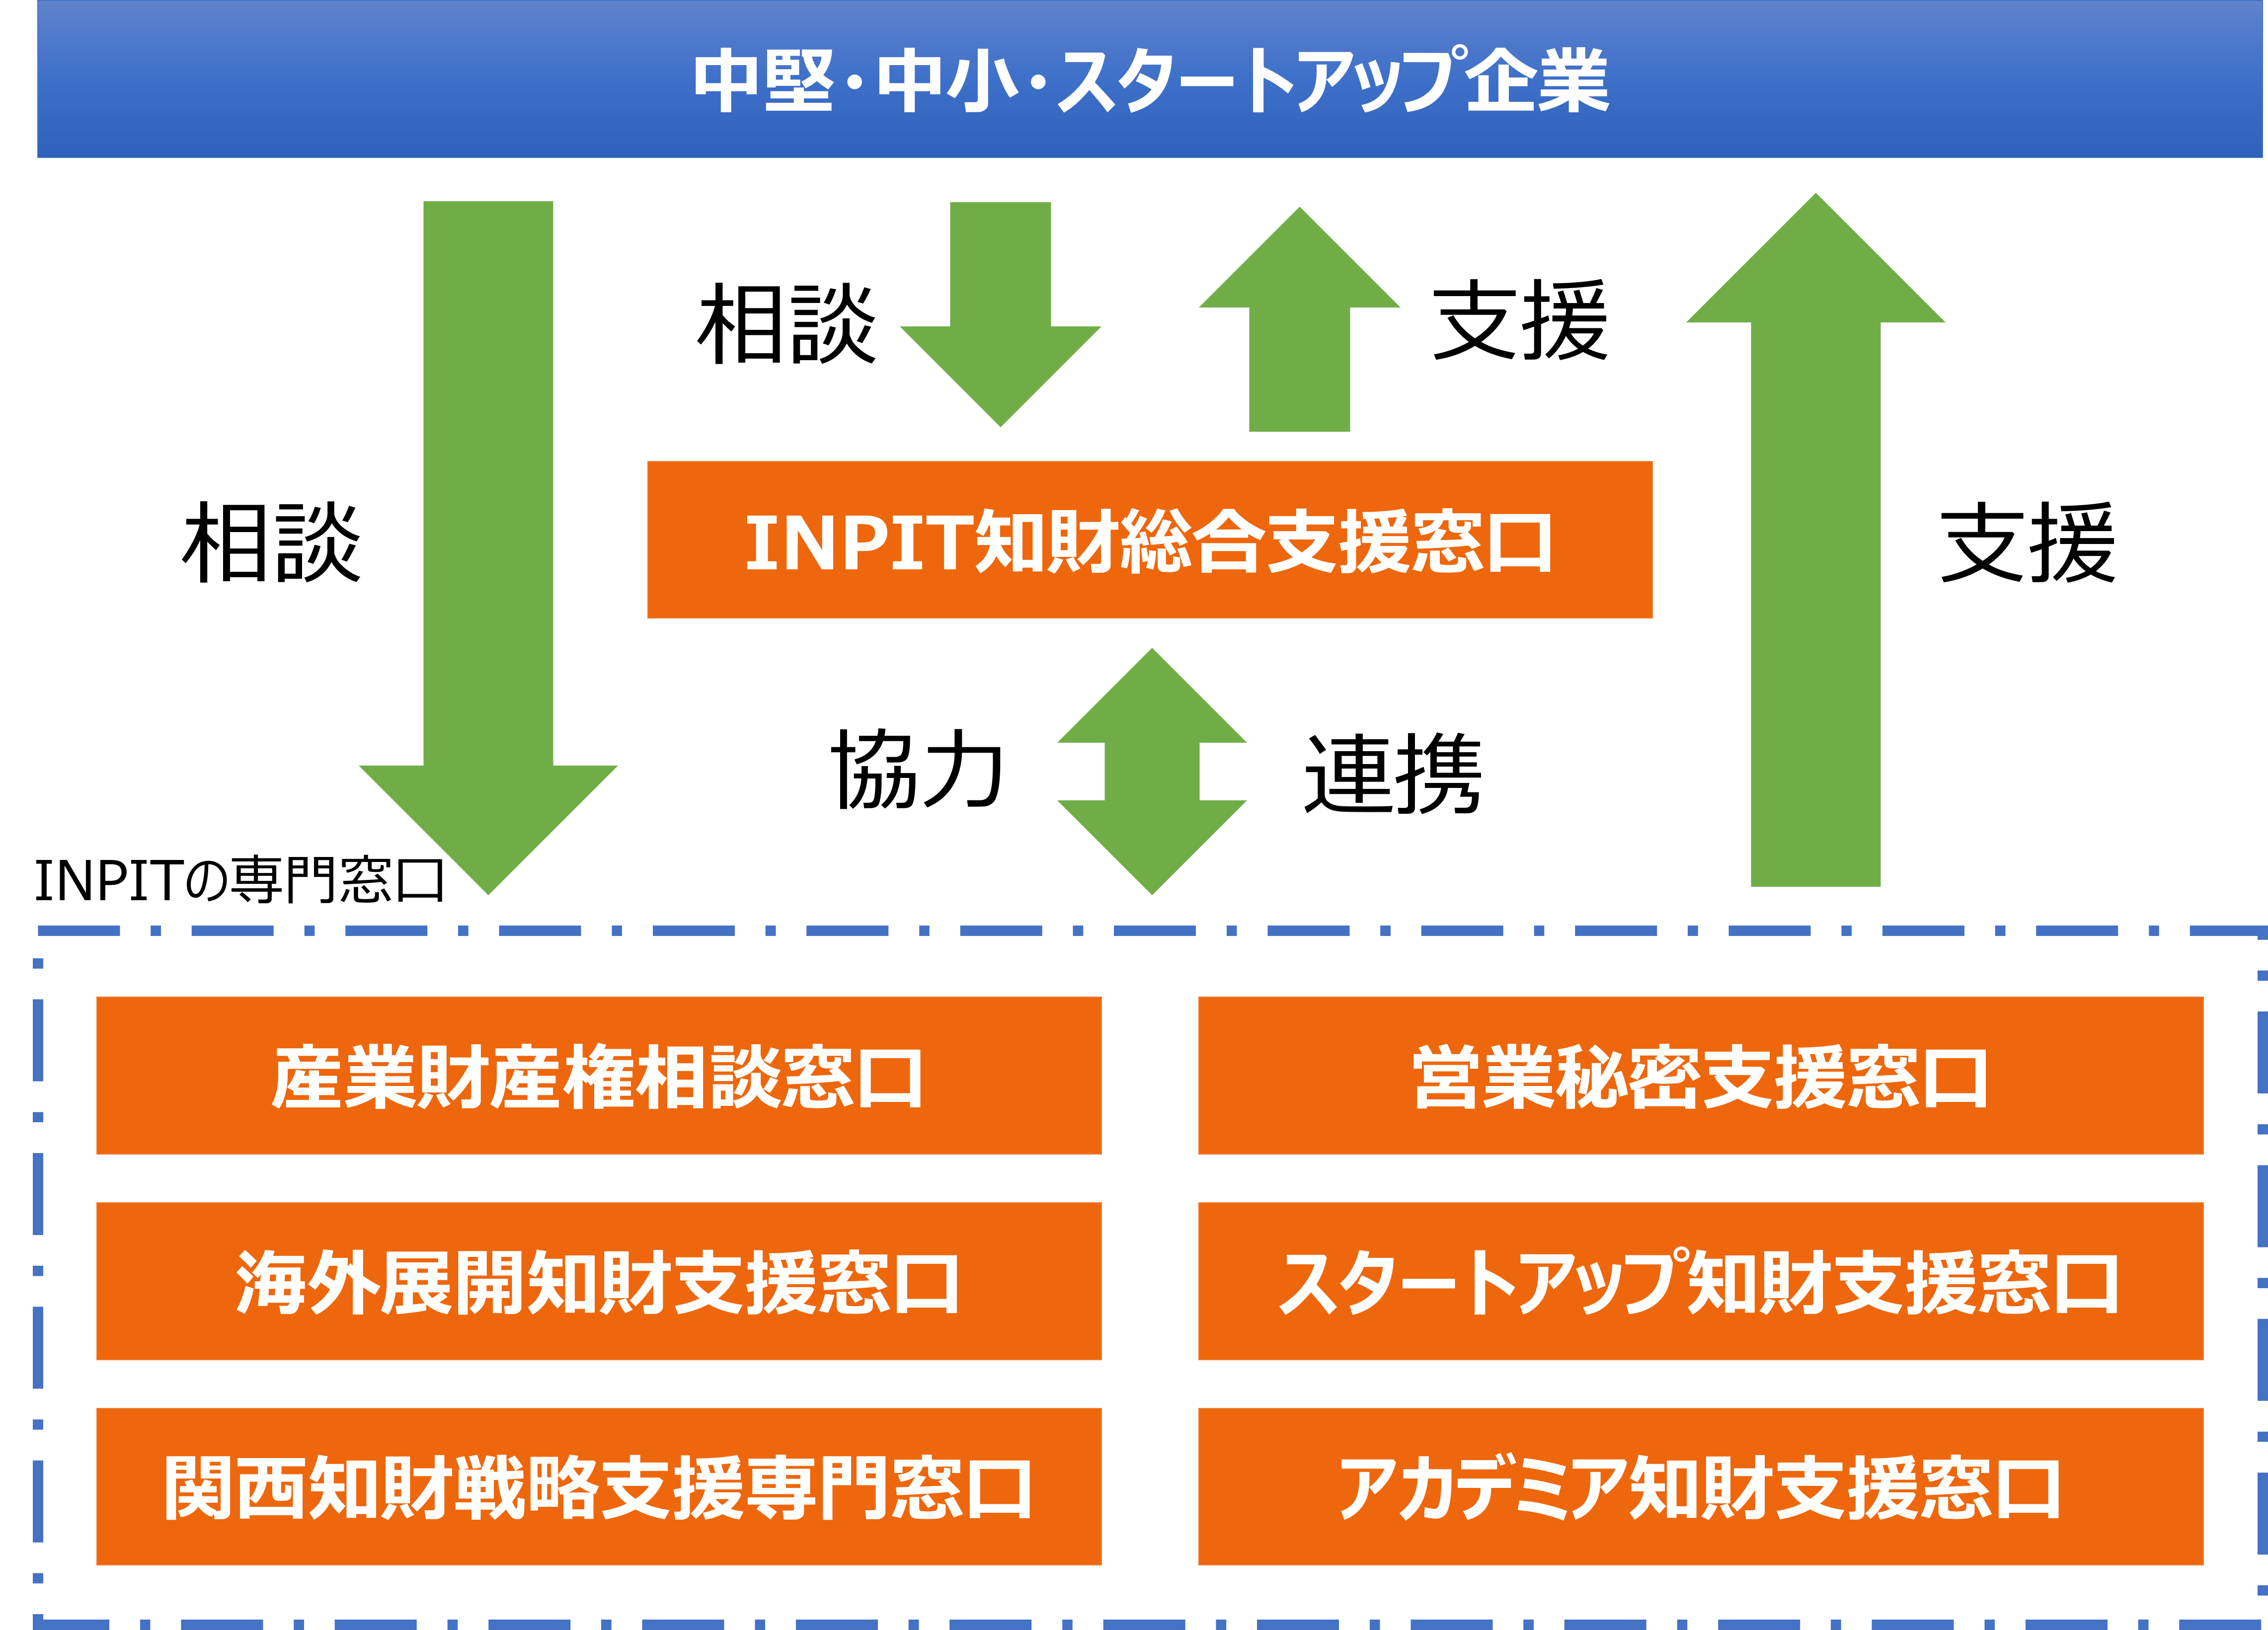 INPITの相談支援窓口